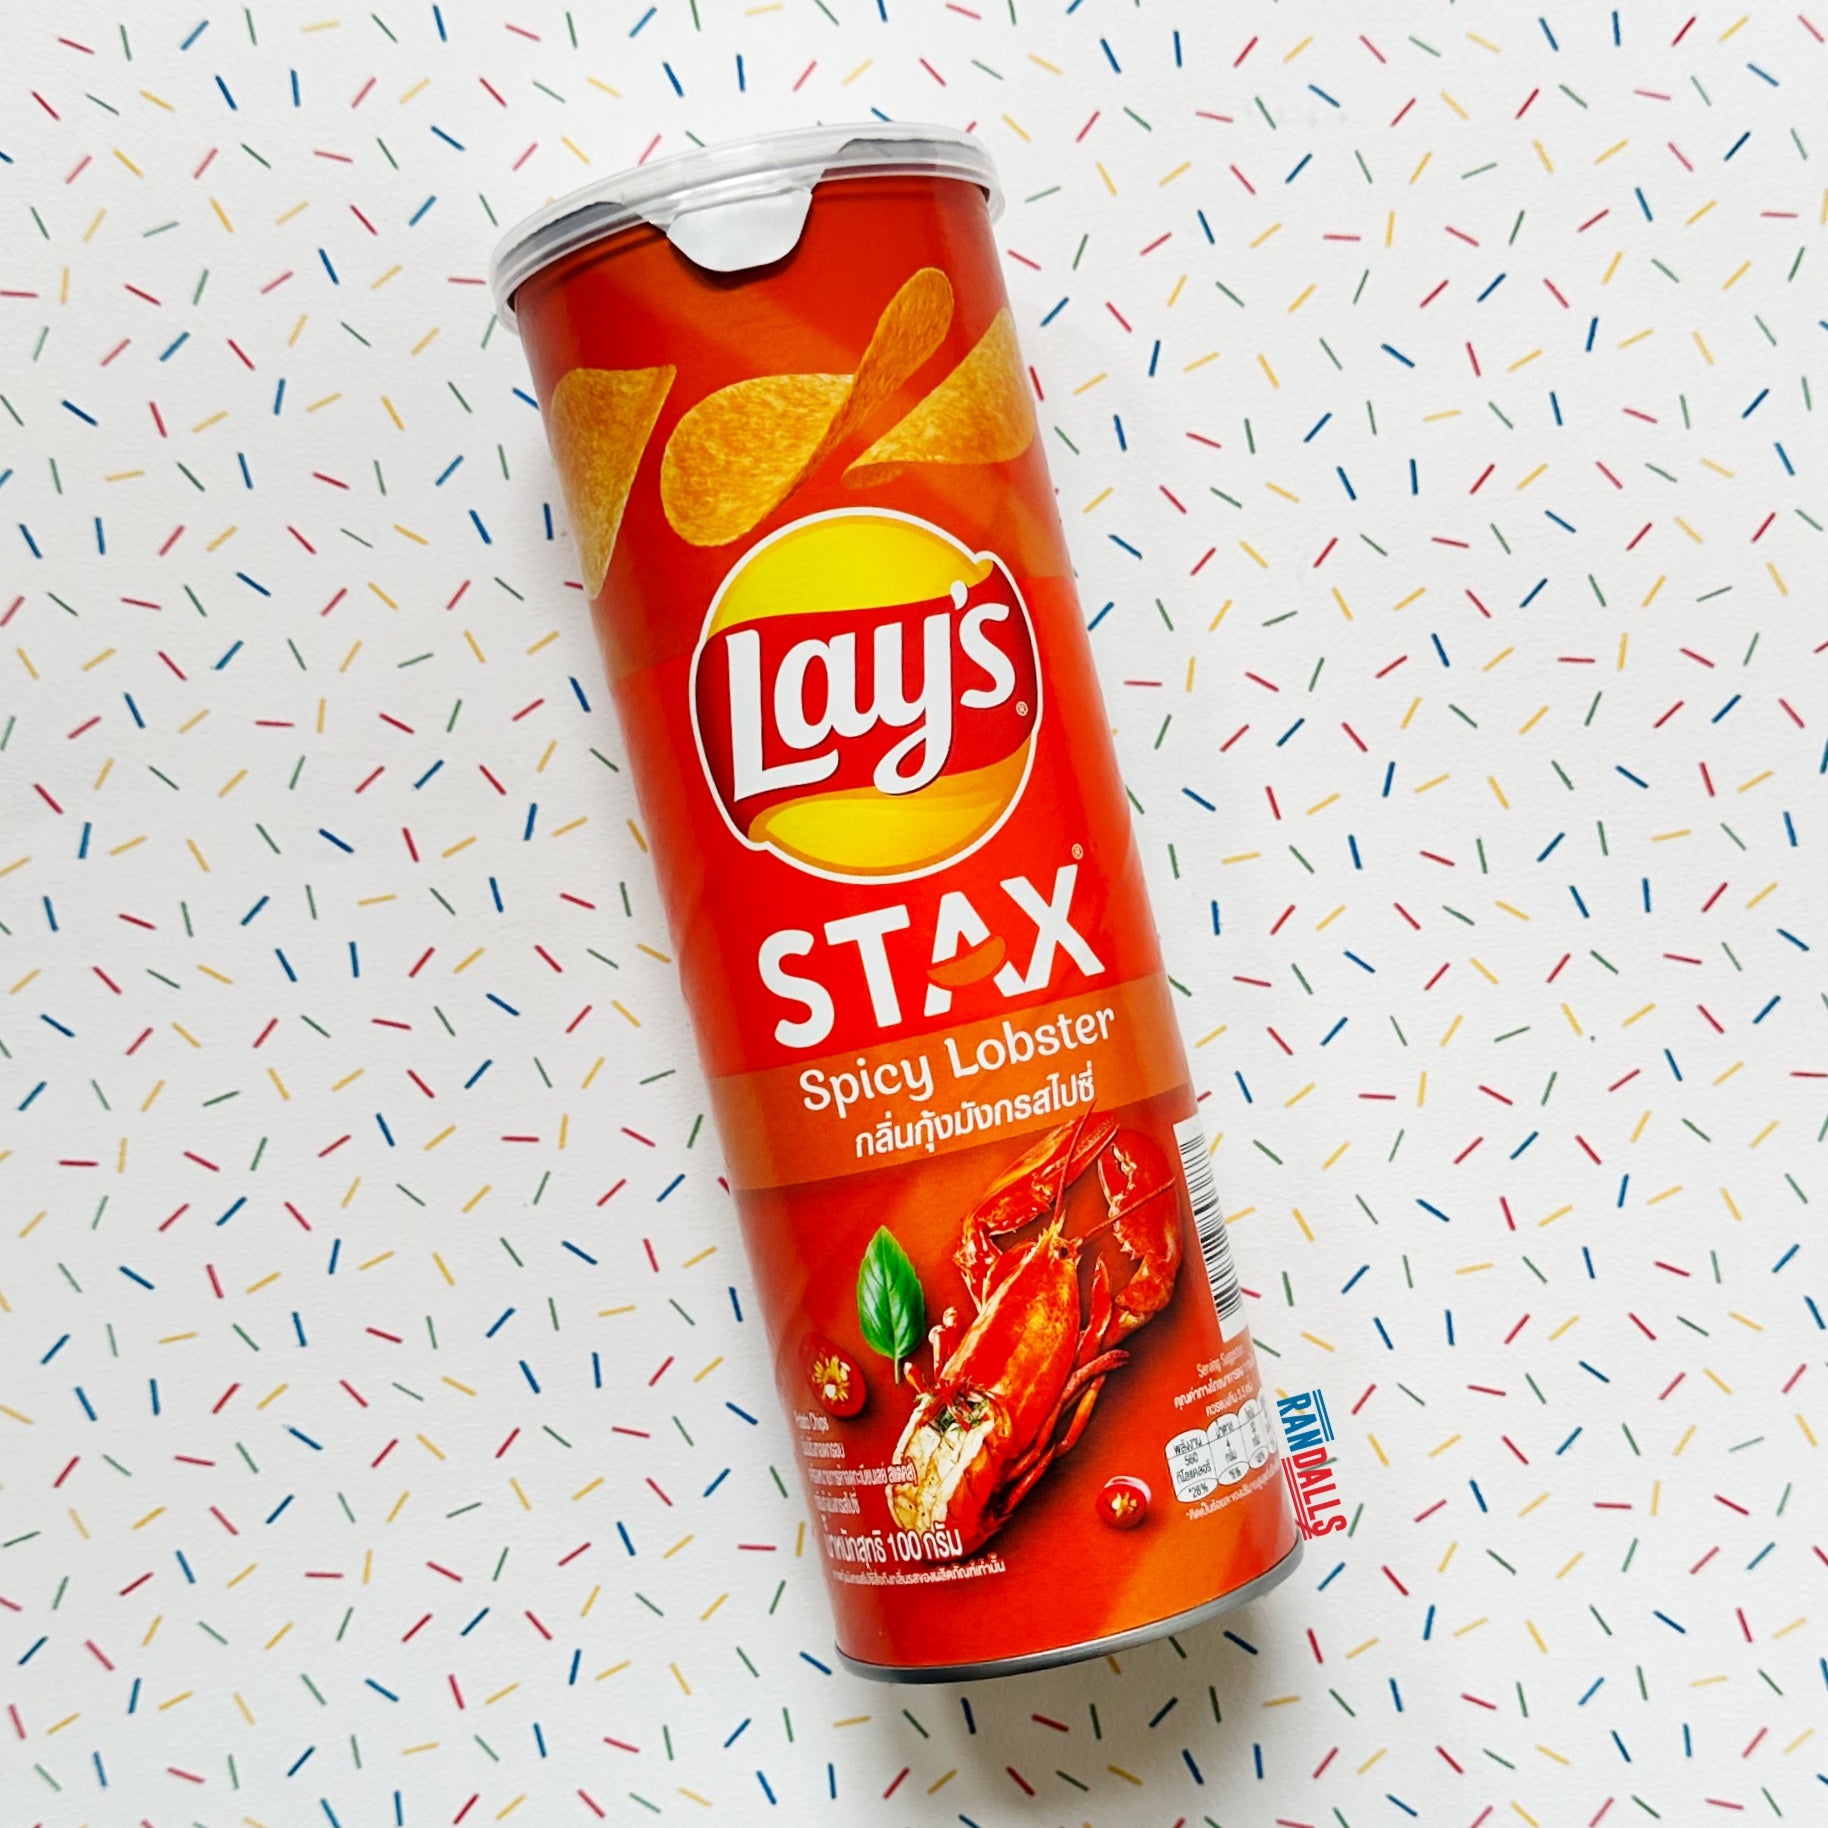 lays, lays stax, lays stax spicy lobster, spicy lobster, lays chips, thailand, randalls, randallsuk